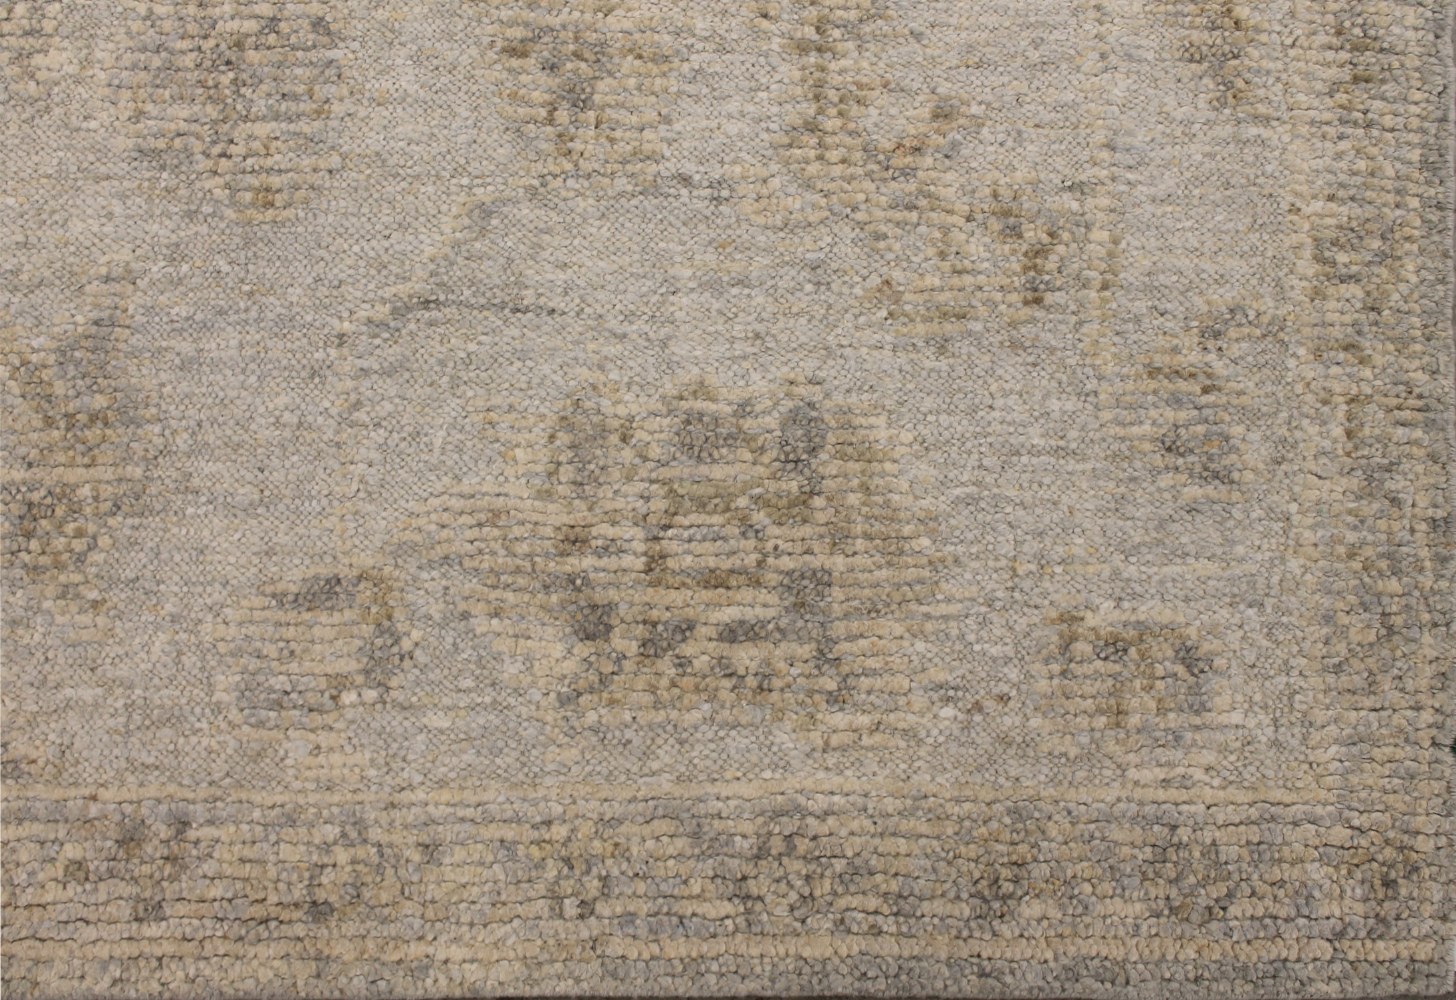 6x9 Oushak Hand Knotted Wool Area Rug - MR028304